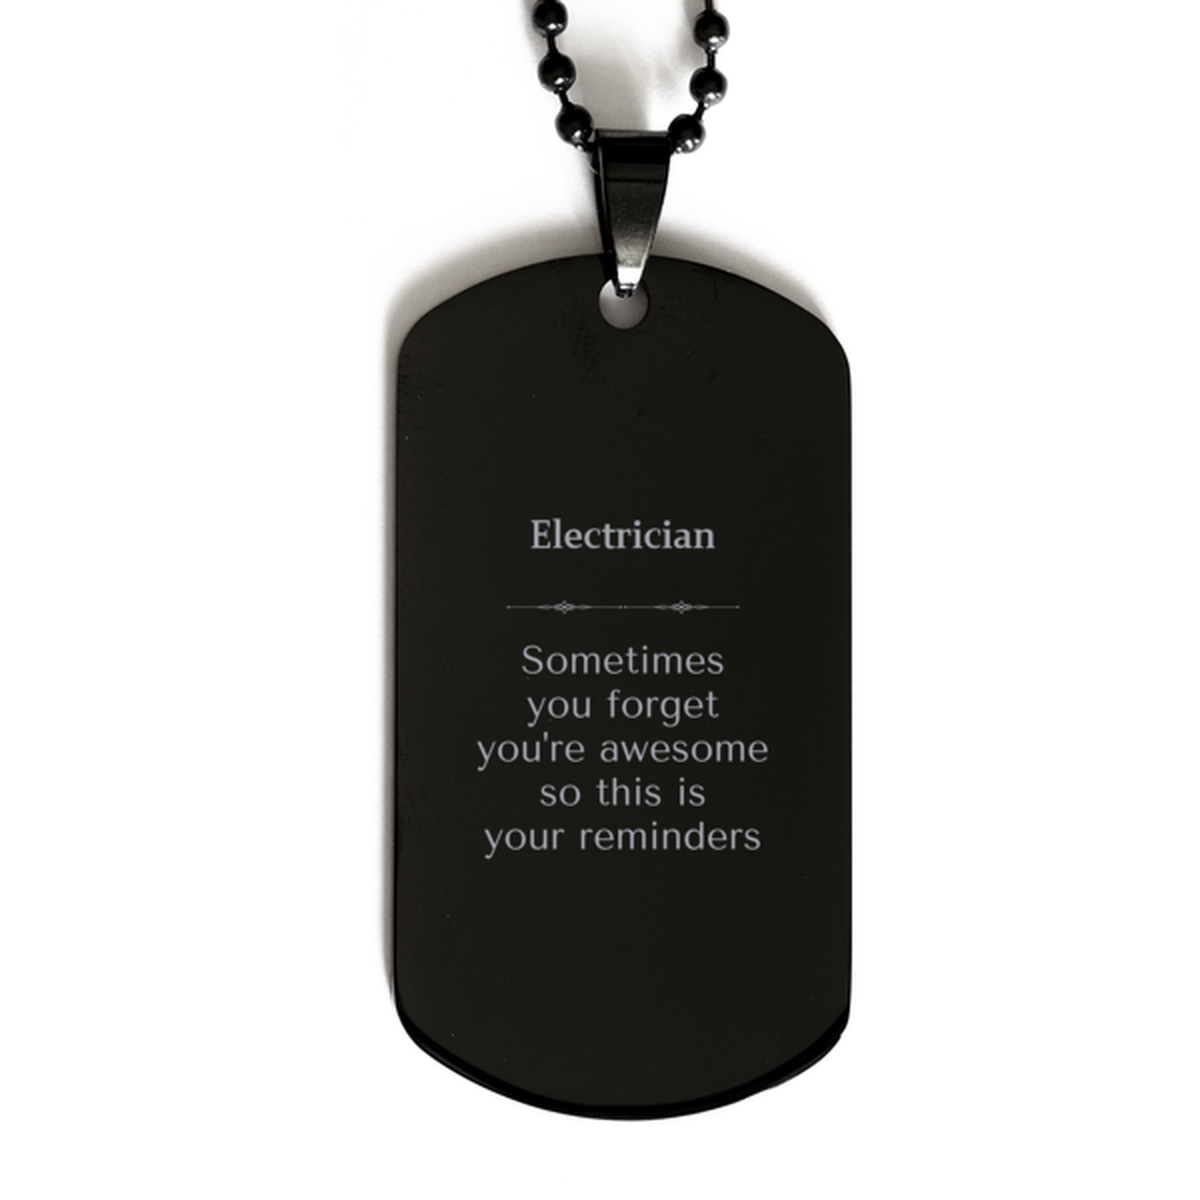 Sentimental Electrician Black Dog Tag, Electrician Sometimes you forget you're awesome so this is your reminders, Graduation Christmas Birthday Gifts for Electrician, Men, Women, Coworkers